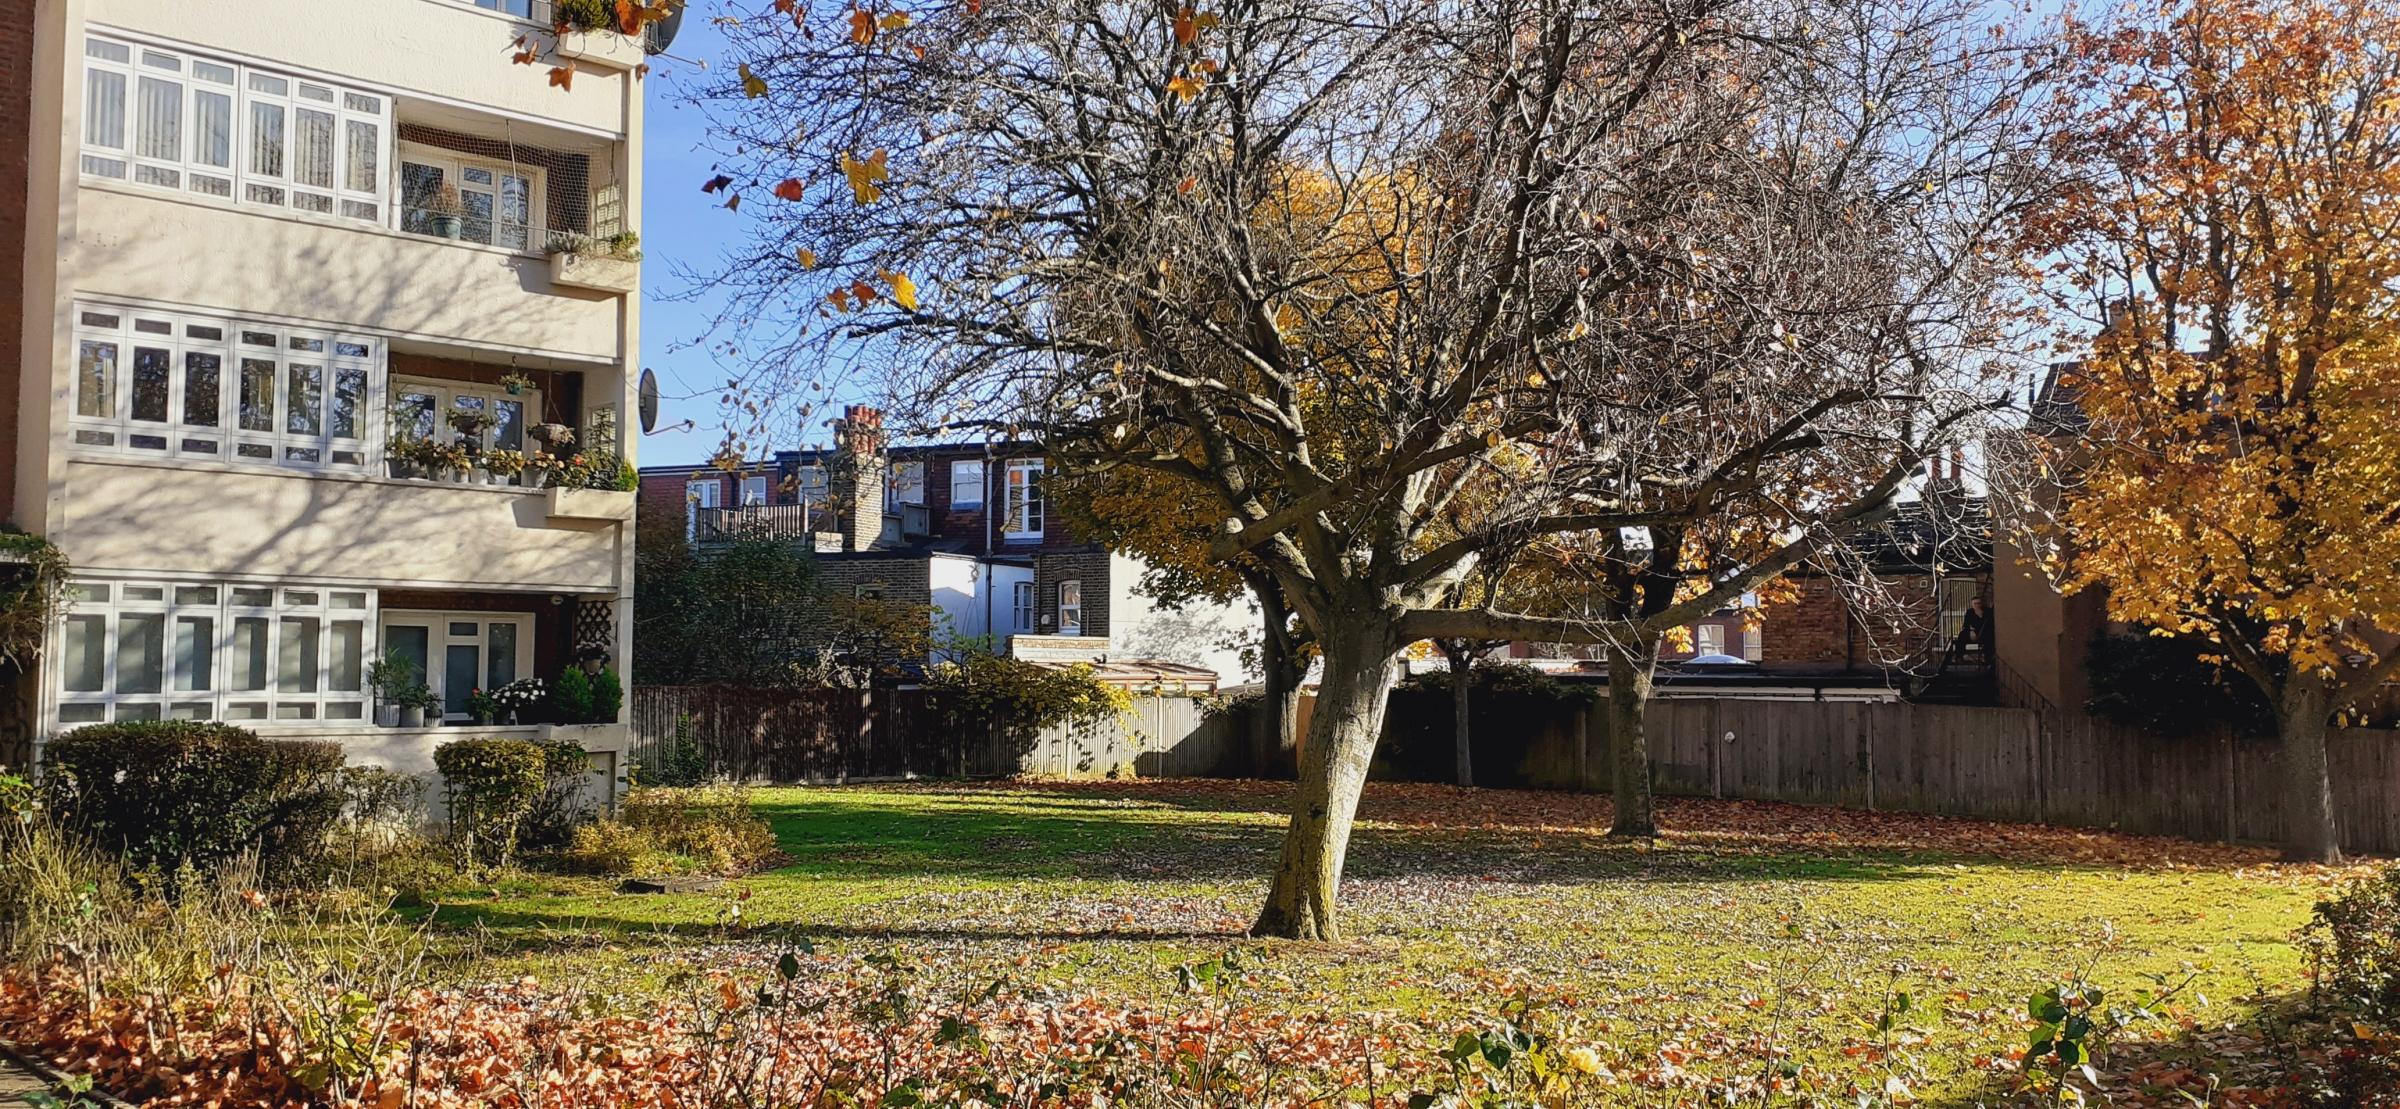 An image of the green space at Ramsey Court, where the council plans to build flats (contributed by Joe Banks)